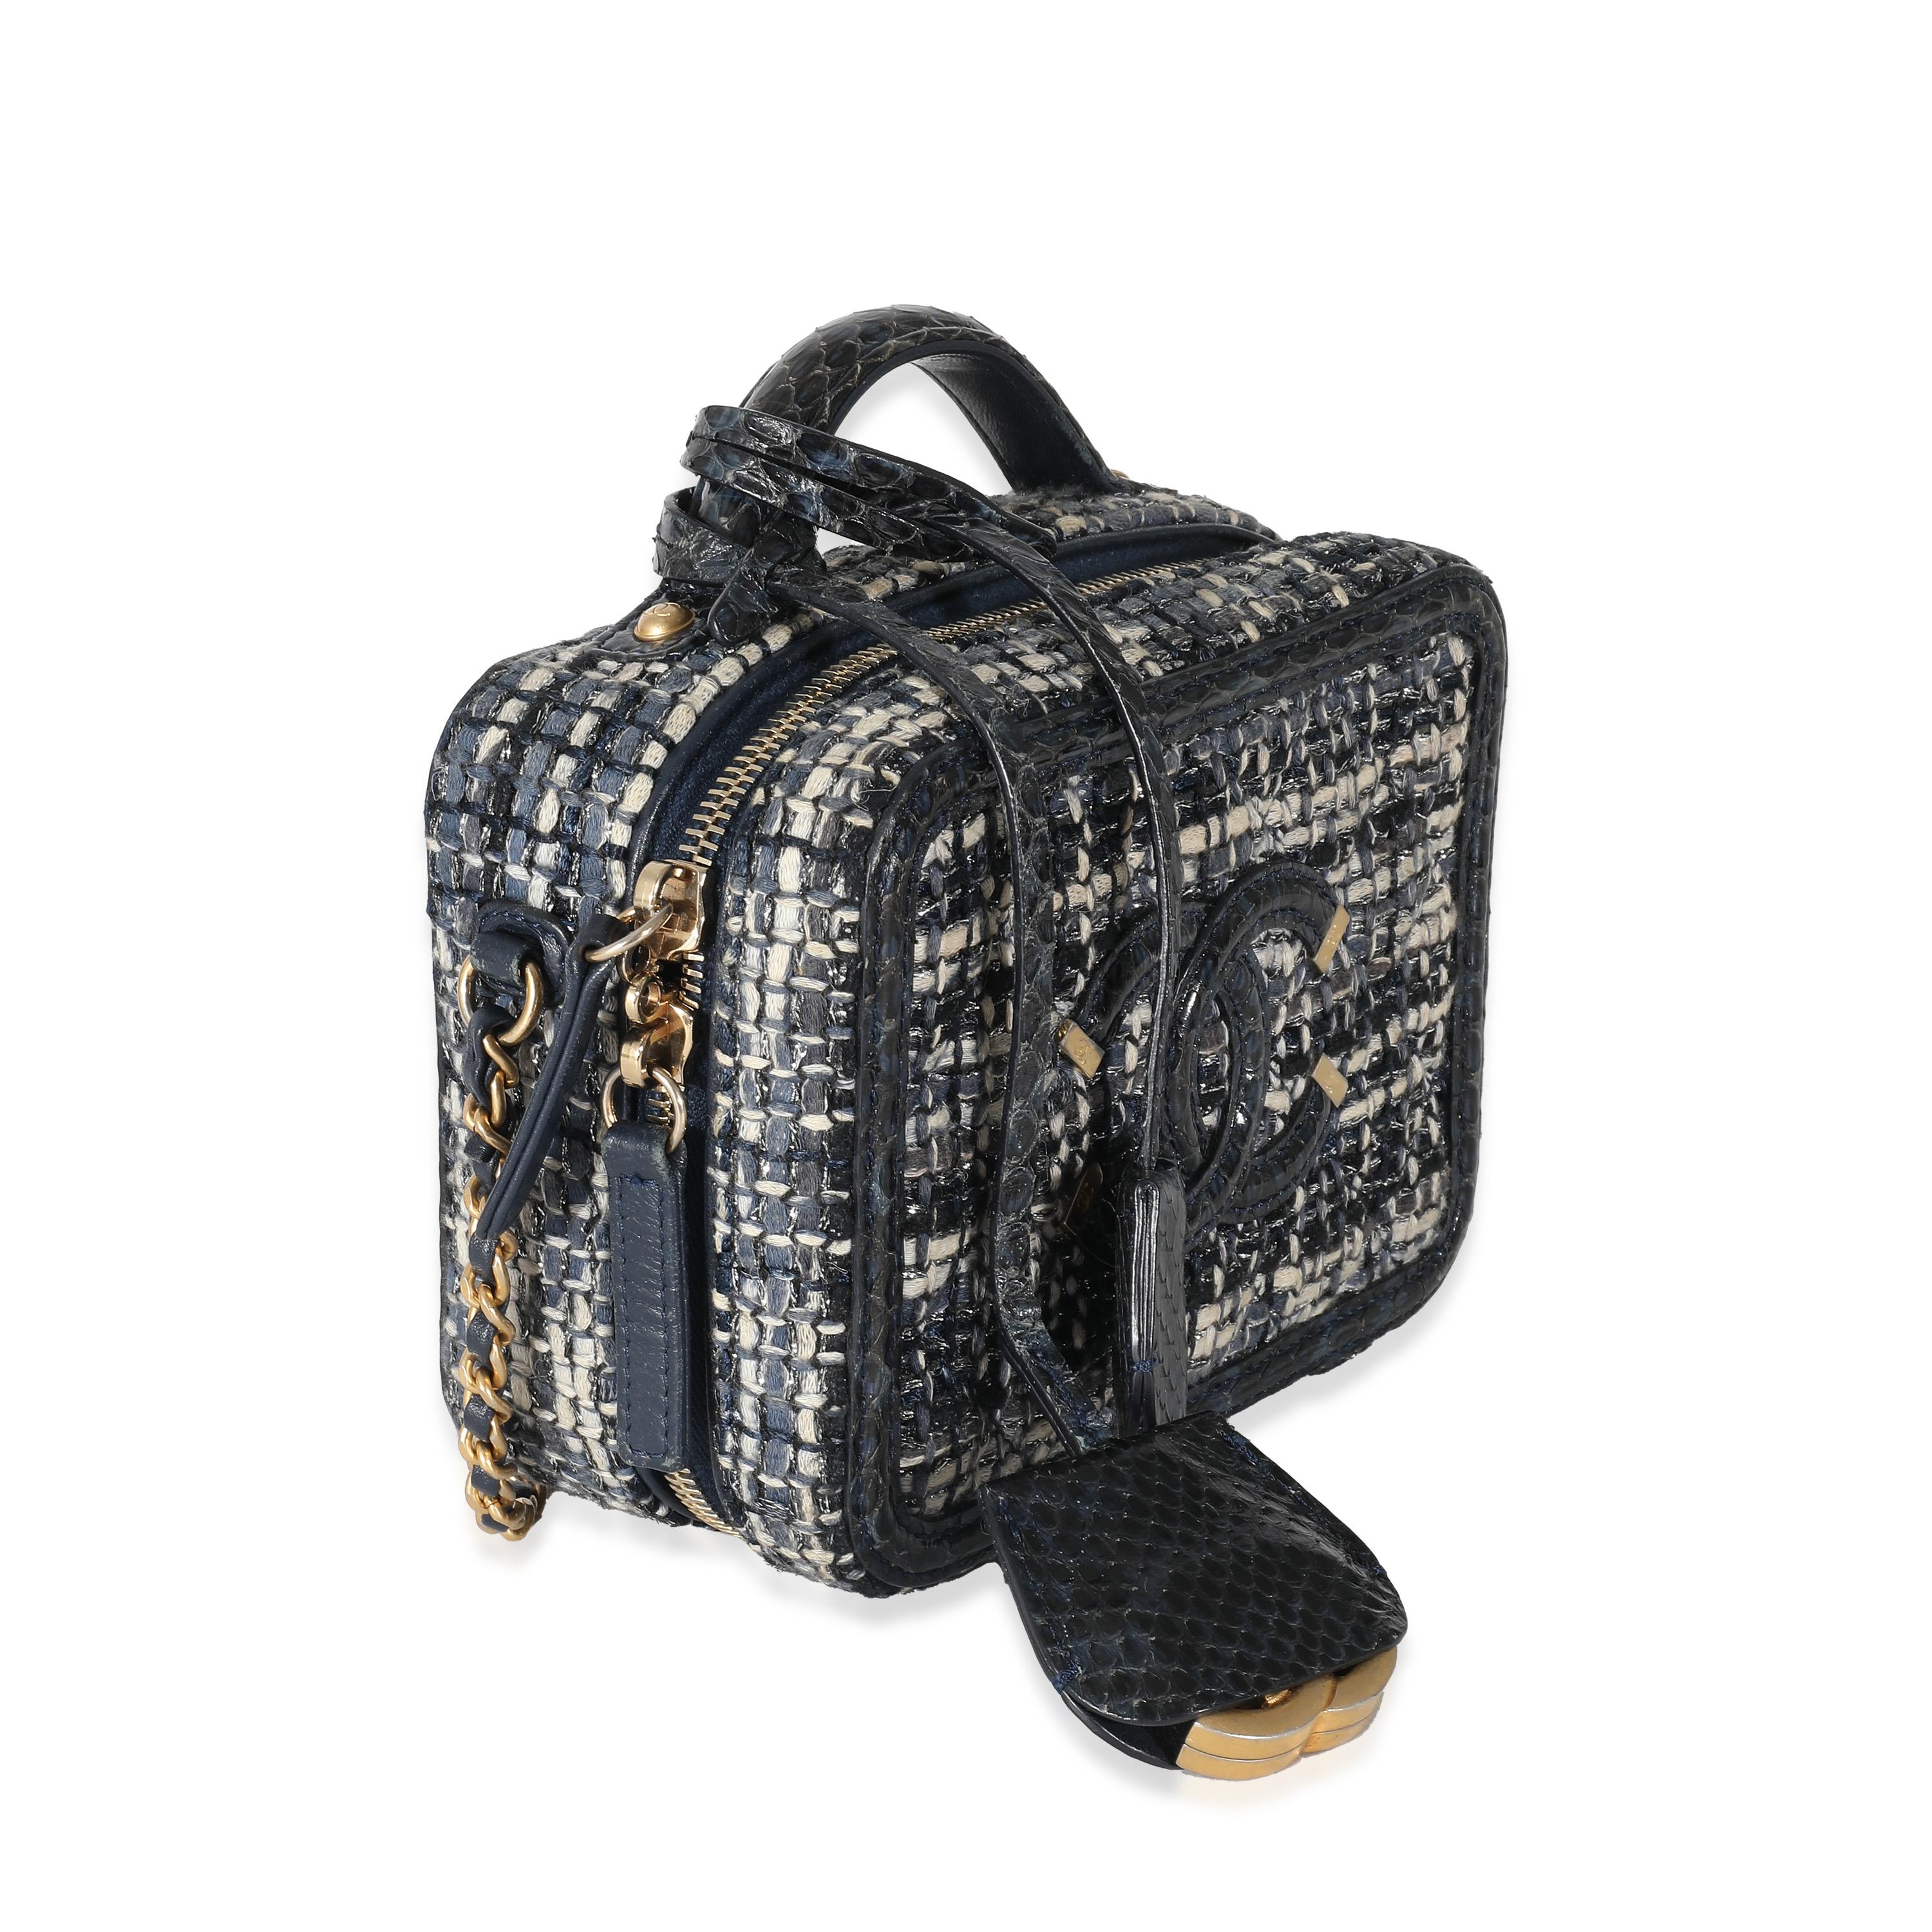 Listing Title: Chanel Navy Tweed Snakeskin Small CC Filigree Vanity Case
SKU: 136877
Condition: Pre-owned 
Condition Description: Intrinsically Chanel, the medium Coco top handle bag was named after the maison's founder. Introduced in 2015, the bag